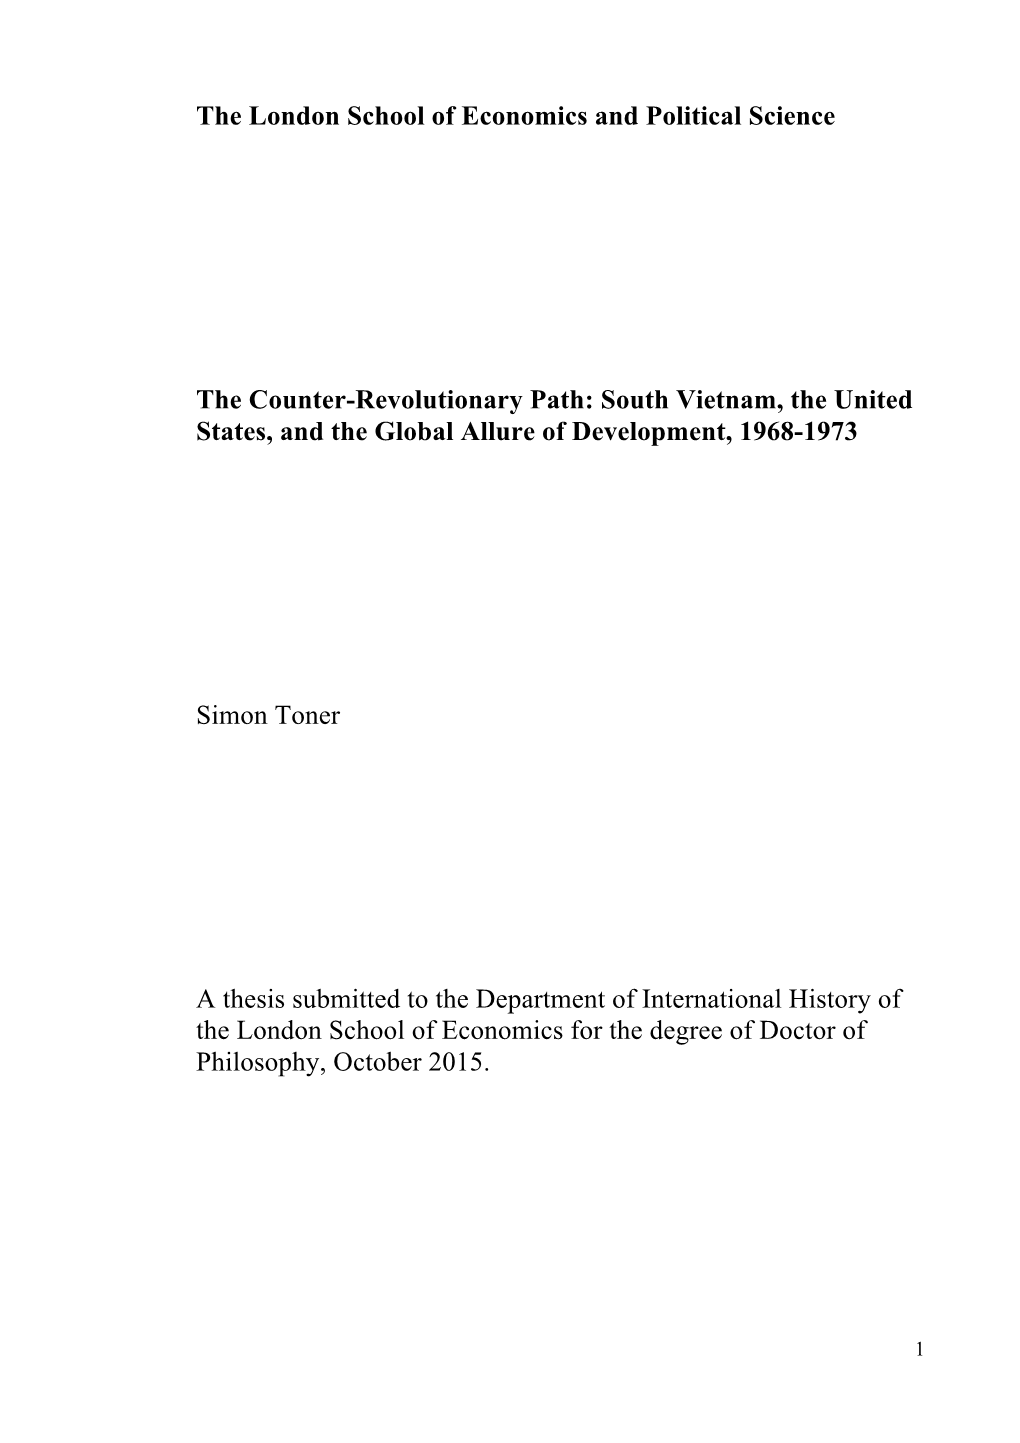 The London School of Economics and Political Science the Counter-Revolutionary Path: South Vietnam, the United States, and the G